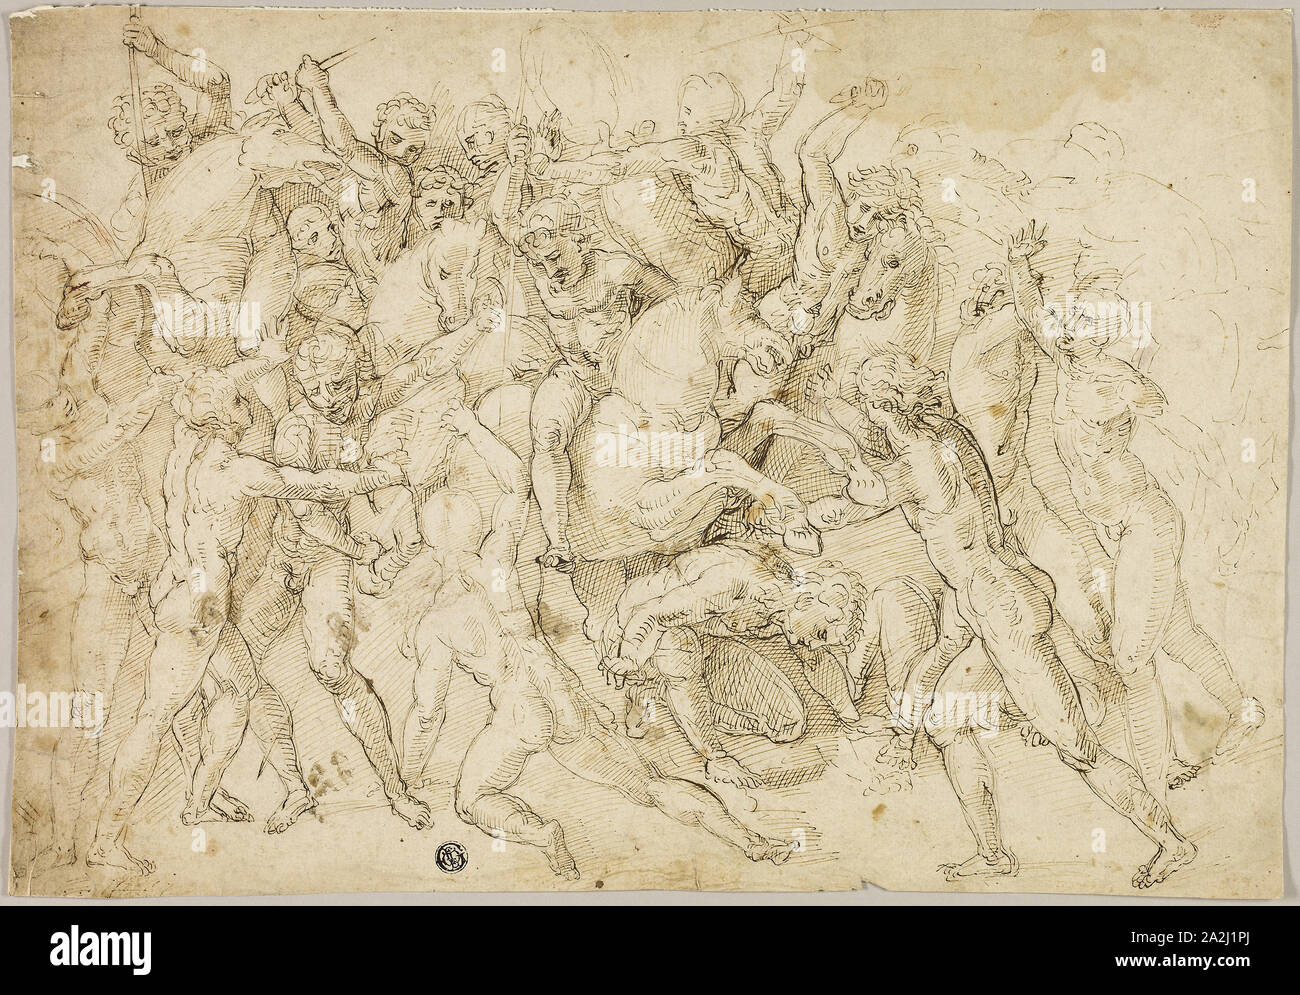 Battle between Cavalry and Foot Soldiers, late 16th century, After Girolamo Genga, Italian, c. 1476-1551, Italy, Pen and brown ink, over traces of graphite, on ivory laid paper, 278 x 397 mm Stock Photo